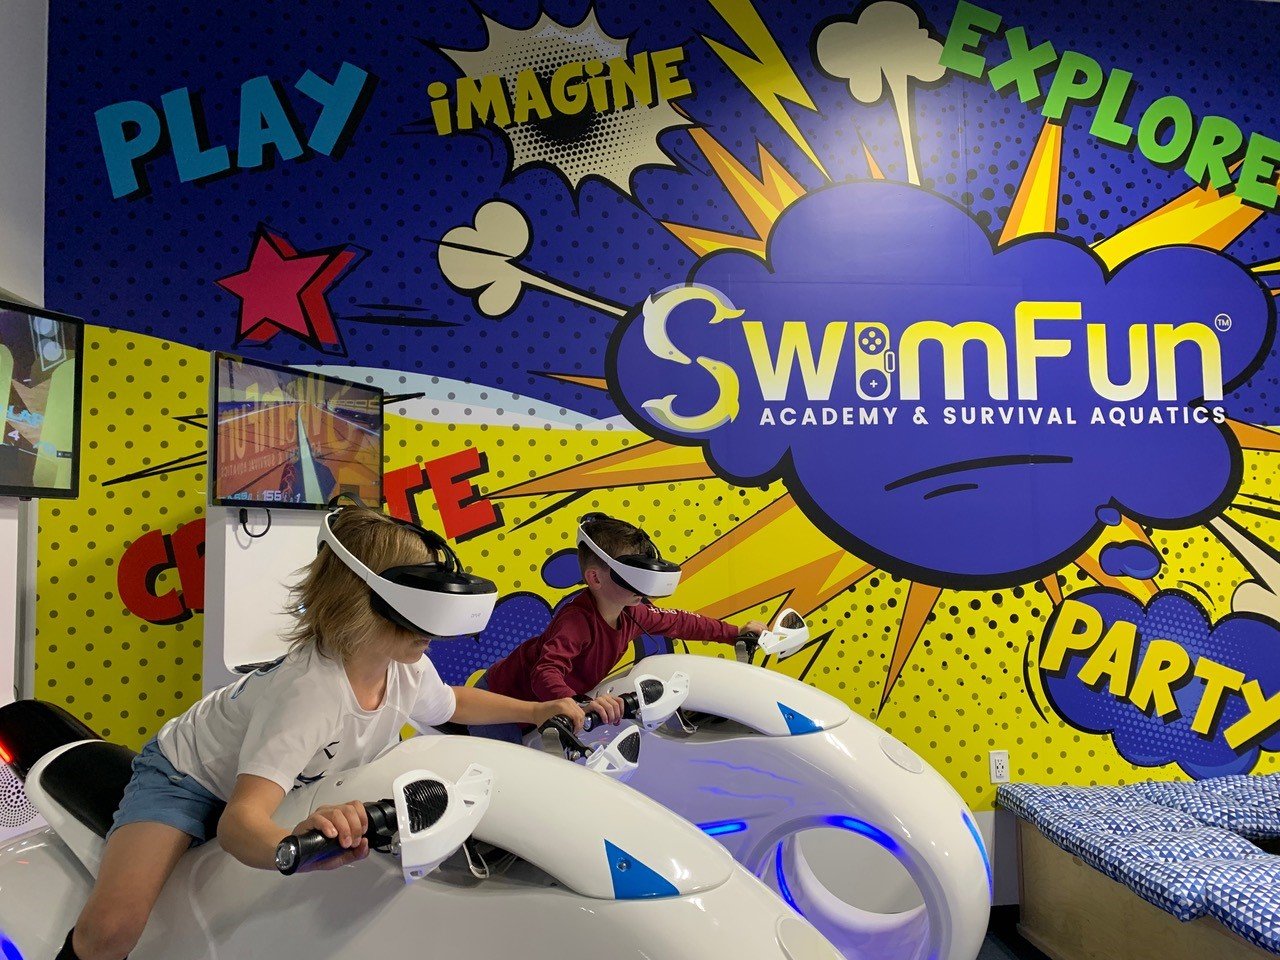 Children play a virtual reality game at SwimFun, which offers a unique approach of combining a modernized survival aquatics and swim academy with STEM-based activities.